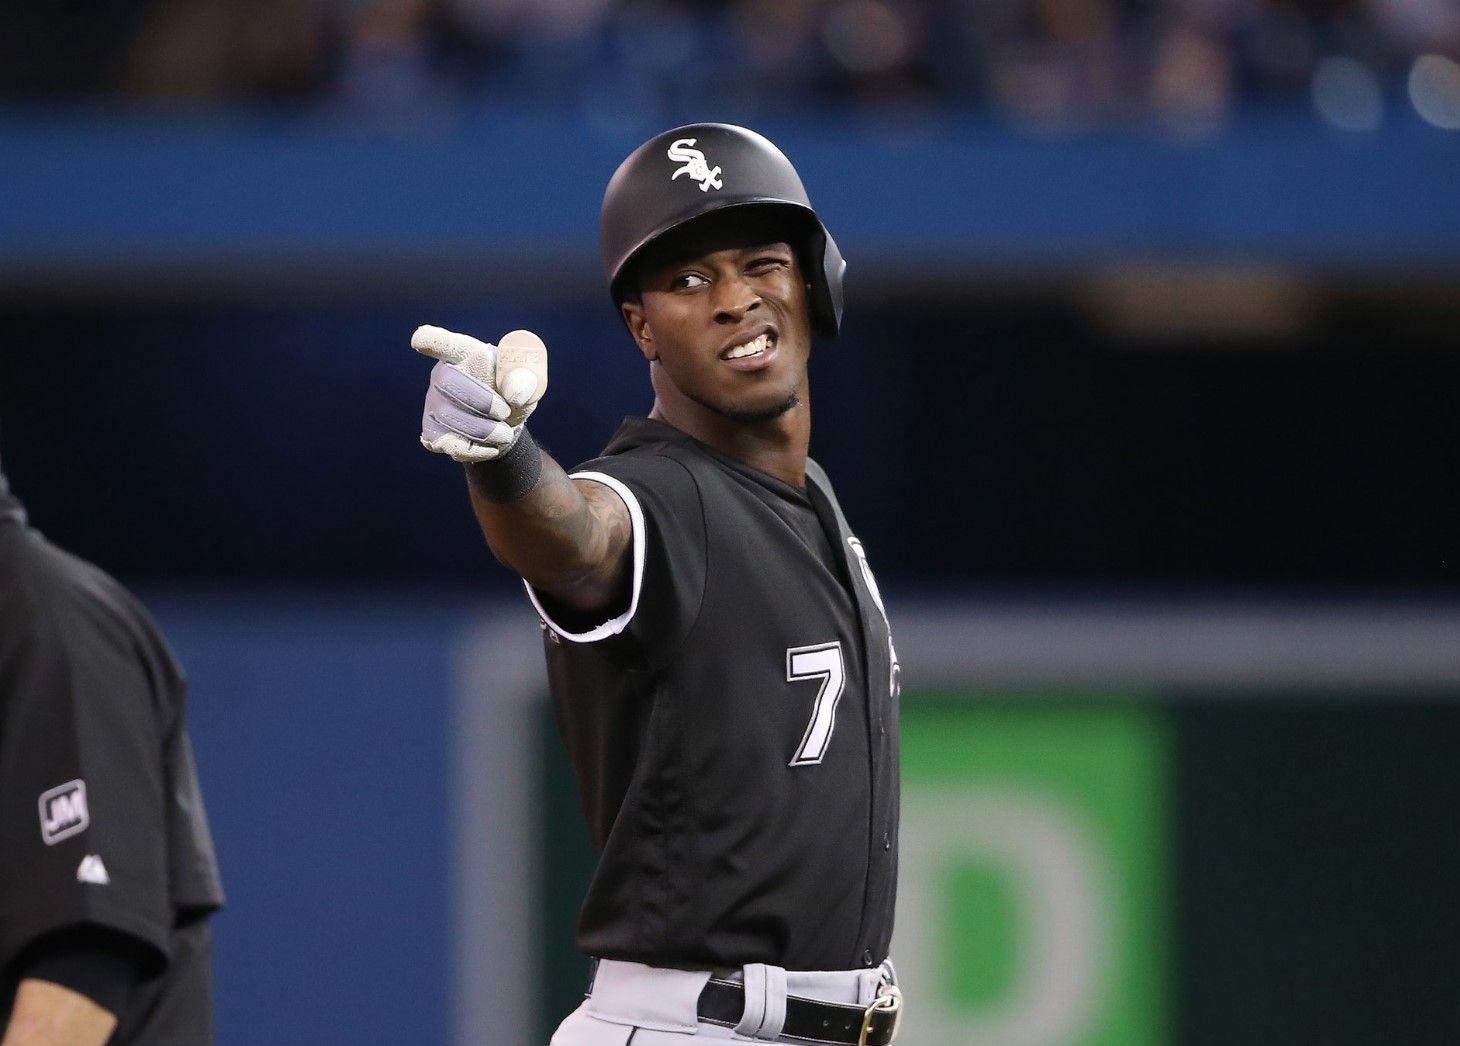 White Sox star Tim Anderson says he wants La Russa to return